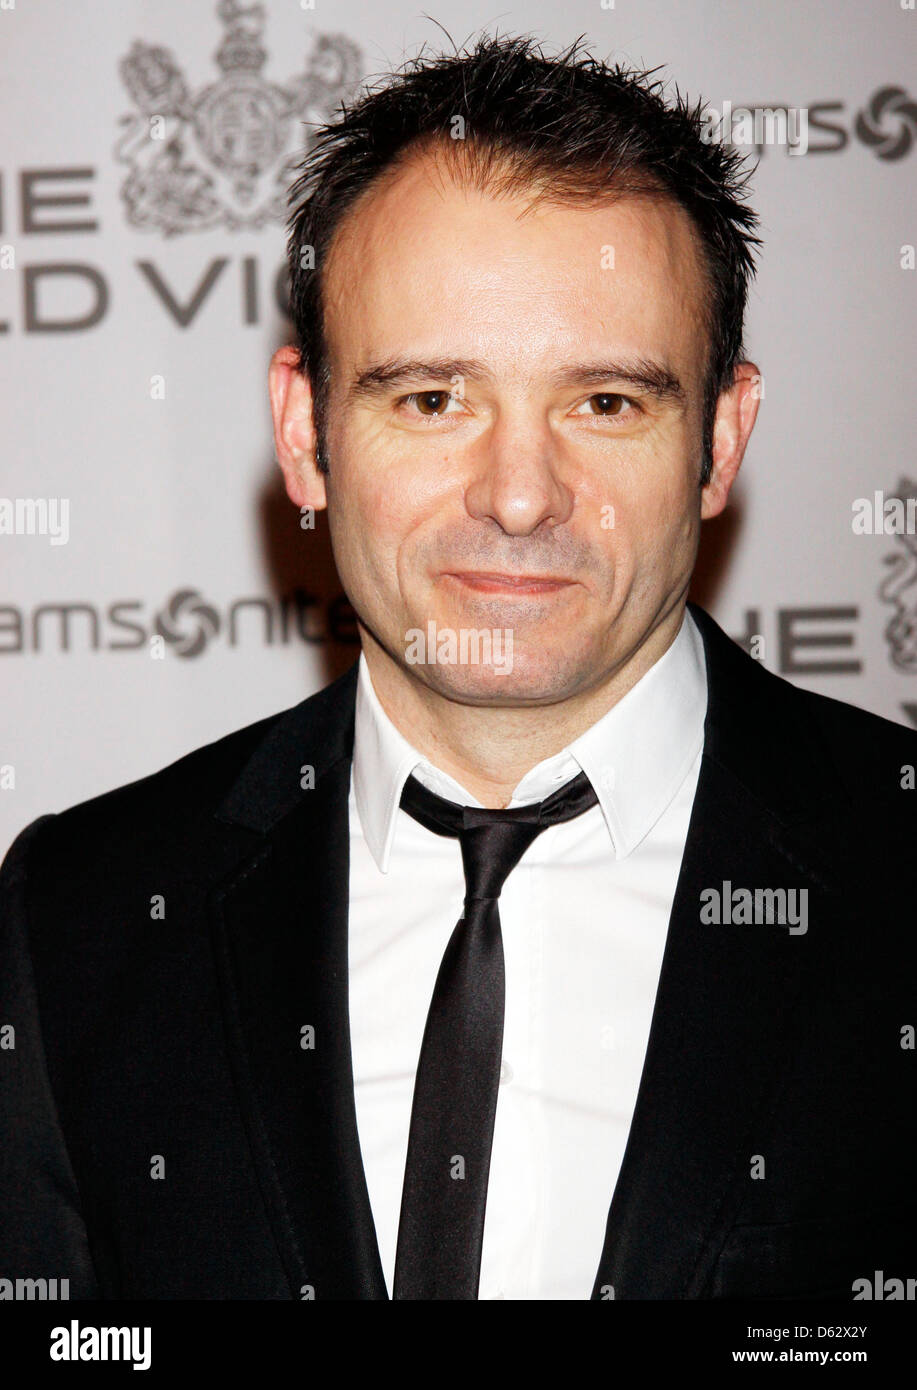 Matthew Warchus The Old Vic Theatre Company Benefit held at Gotham Hall - Arrivals New York City, USA - 23.01.12 Stock Photo